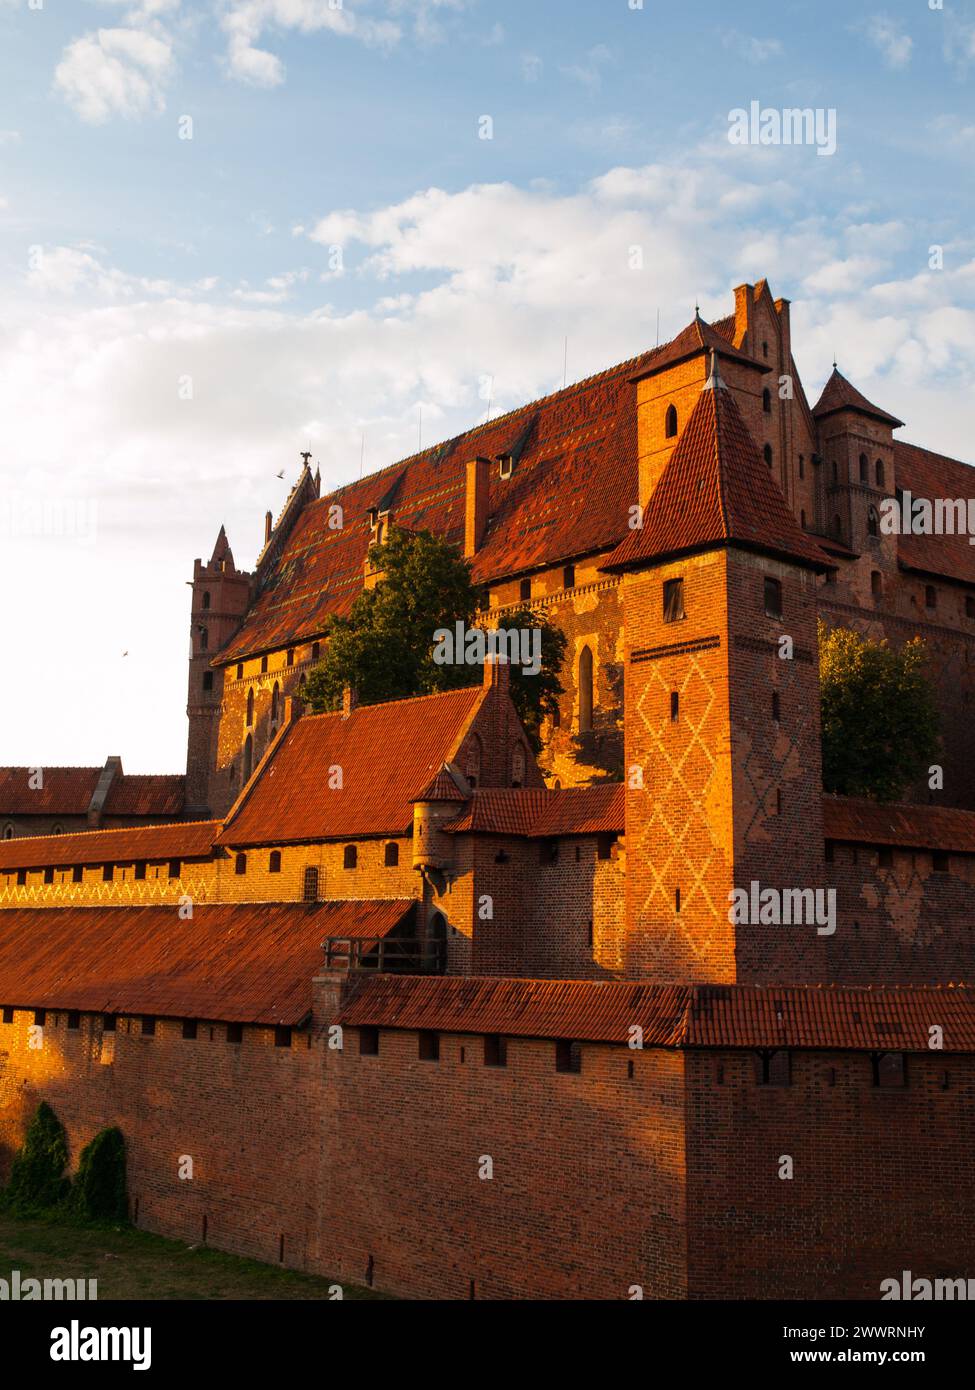 The High Castle with The Blessed Virgin Mary Church, view form south-west, Malbork, Poland Stock Photo